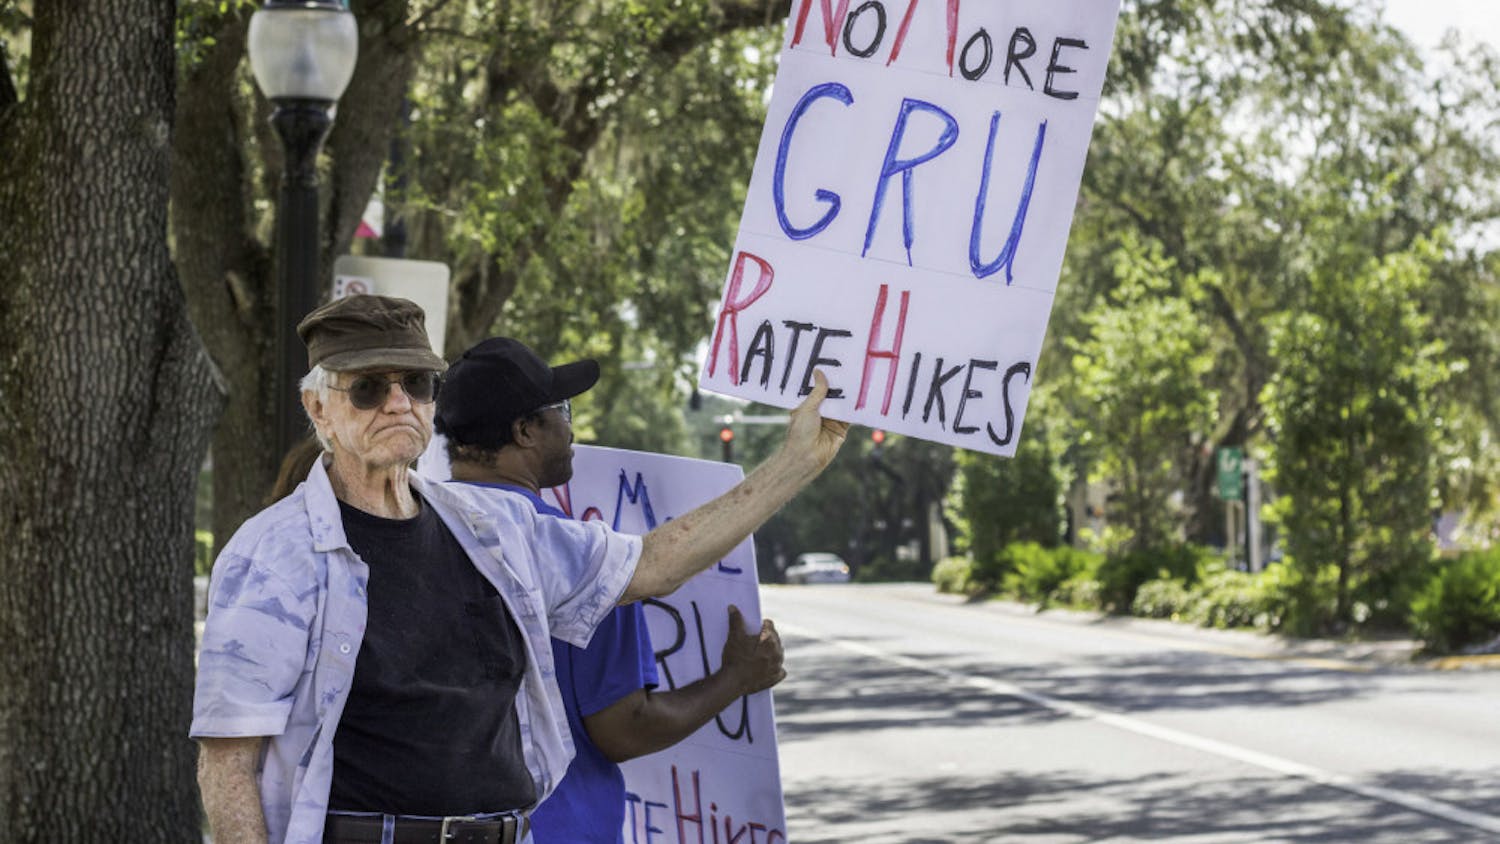 Harold Saive, 75, holds up a protest sign while Jason Davis, 46, stands behind him noon Thursday along University Avenue outside of City Hall. Saive said he believes that most people support the cause but are too timid to protest in person. “For every person who shows up here there’s a thousand behind them who agree,” Saive said.